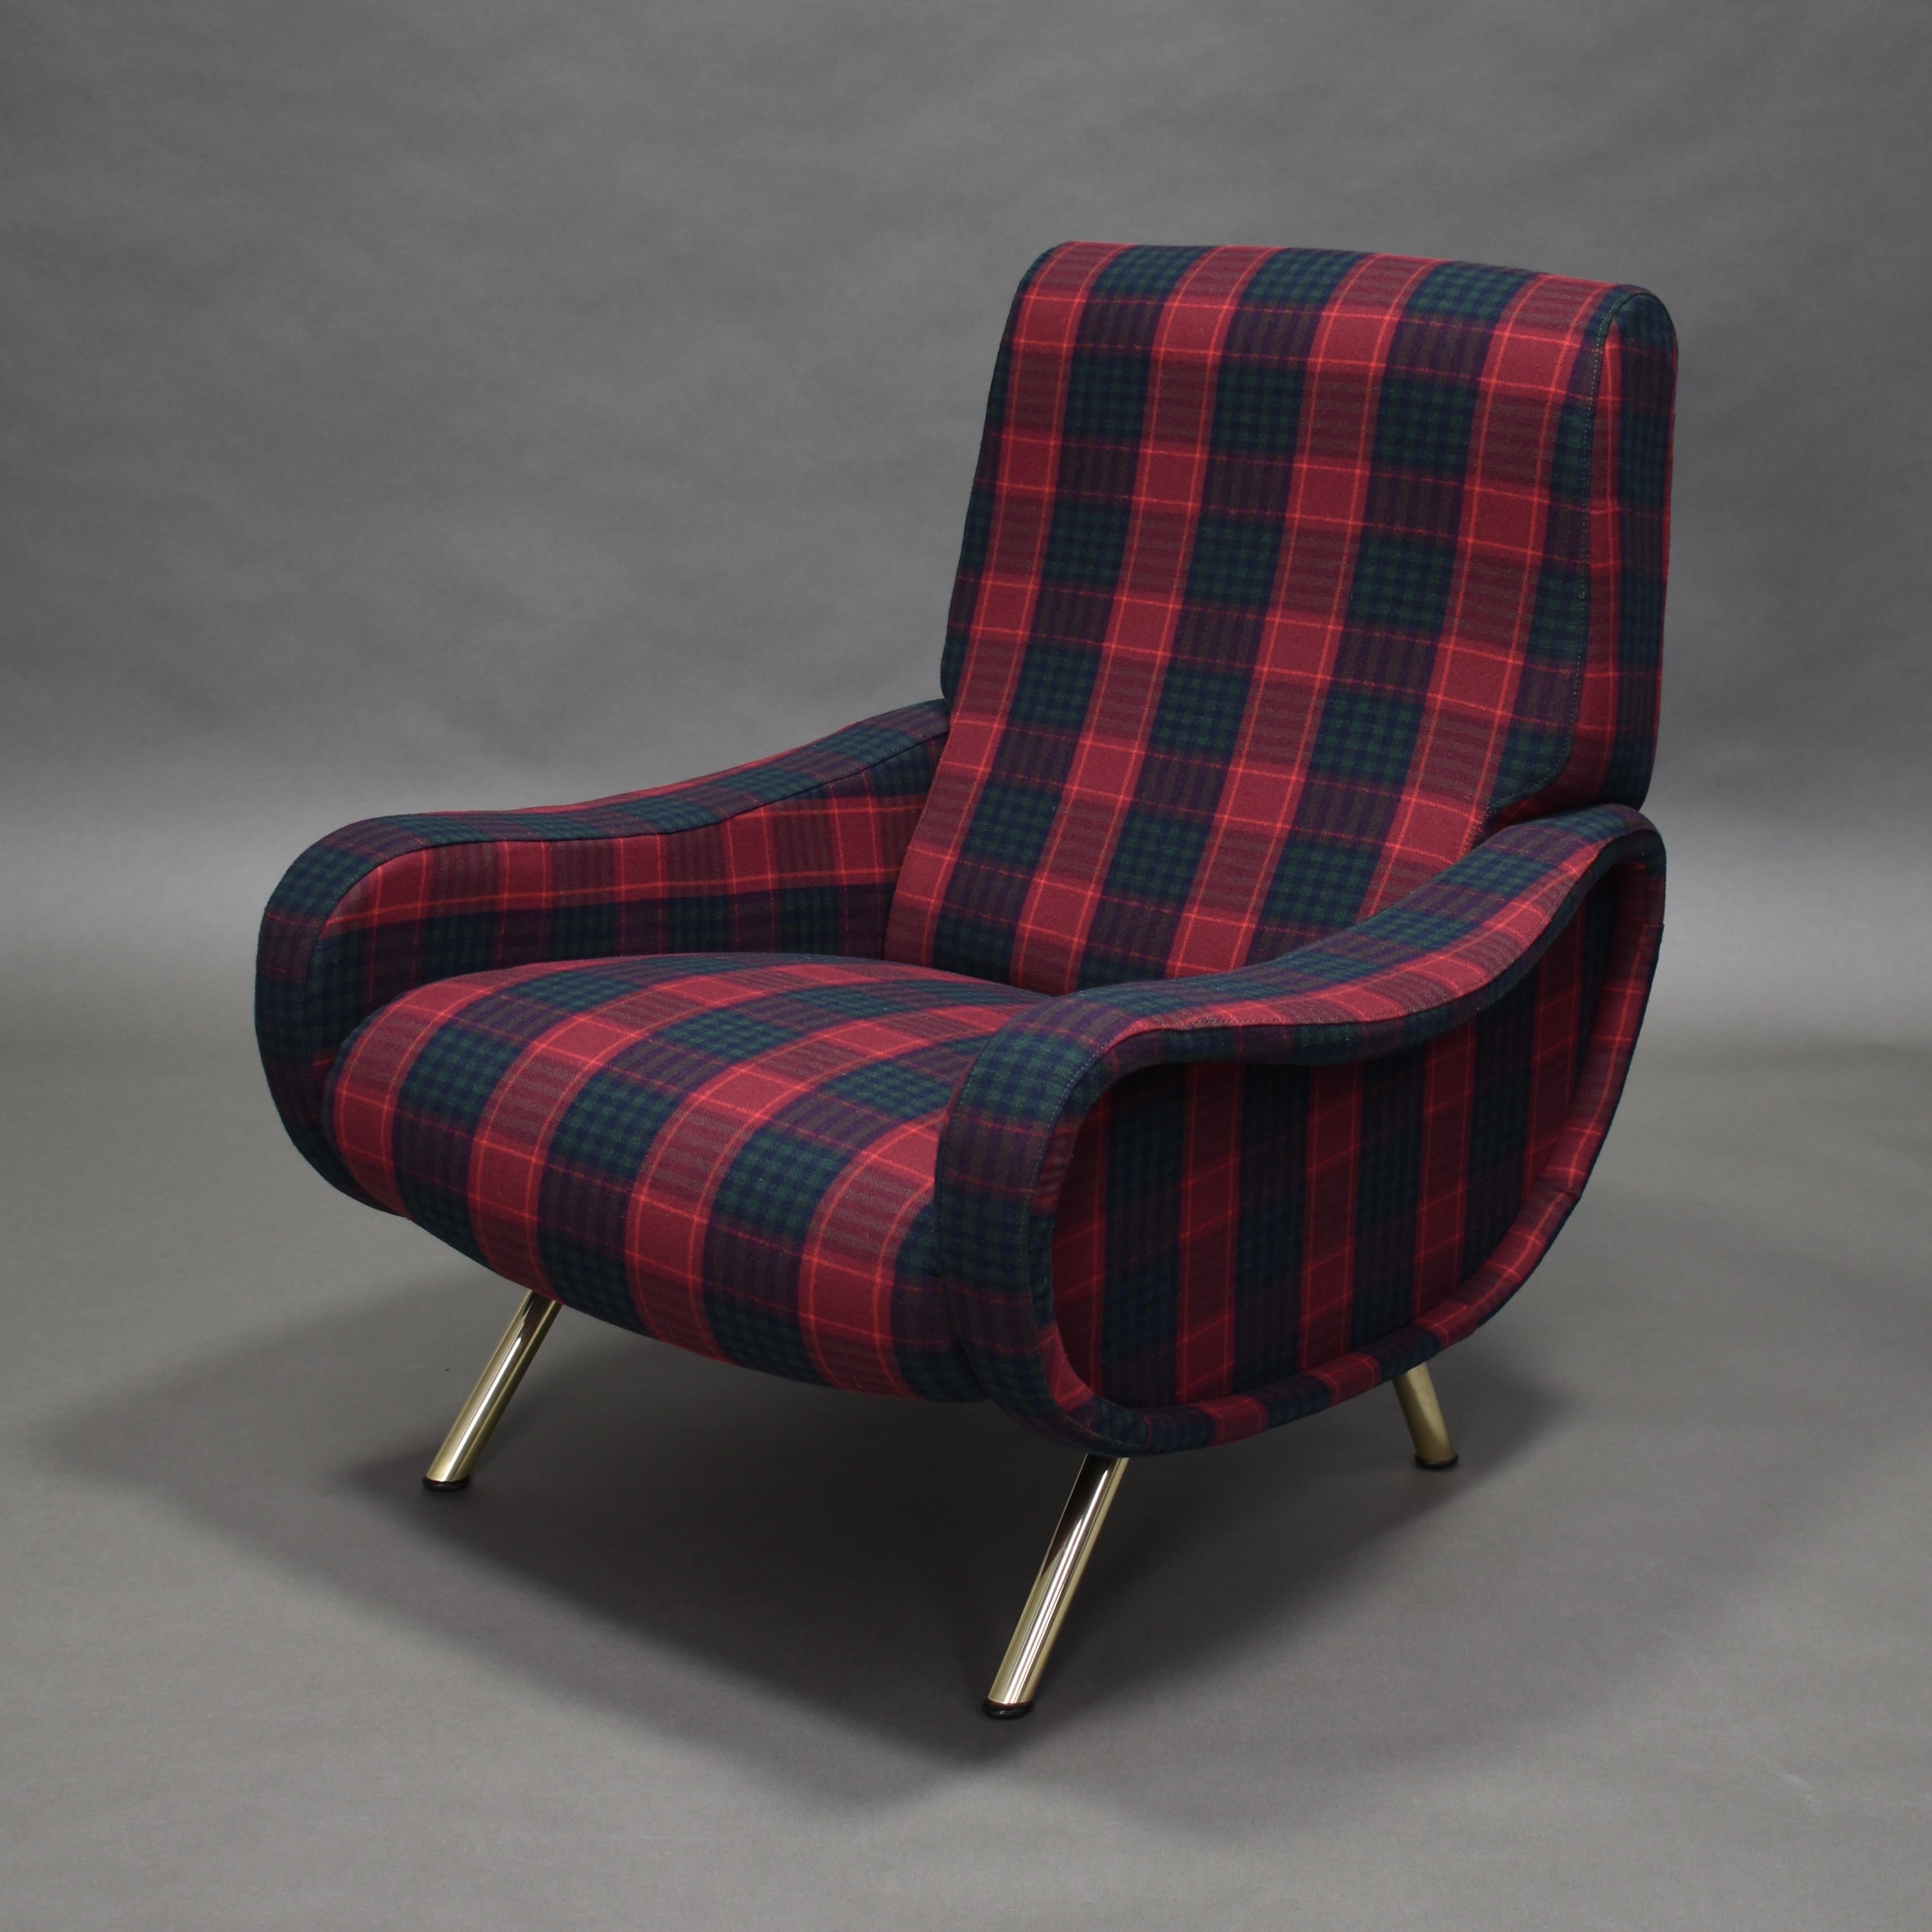 ‘Lady’ chair with brass legs by Marco Zanuso for Arflex – Italy, 1951. 
Recently reupholstered in an Italian flanel fabric. The foam interior has also been replaced.
The chair still has the original Arflex label. 

Designer: Marco